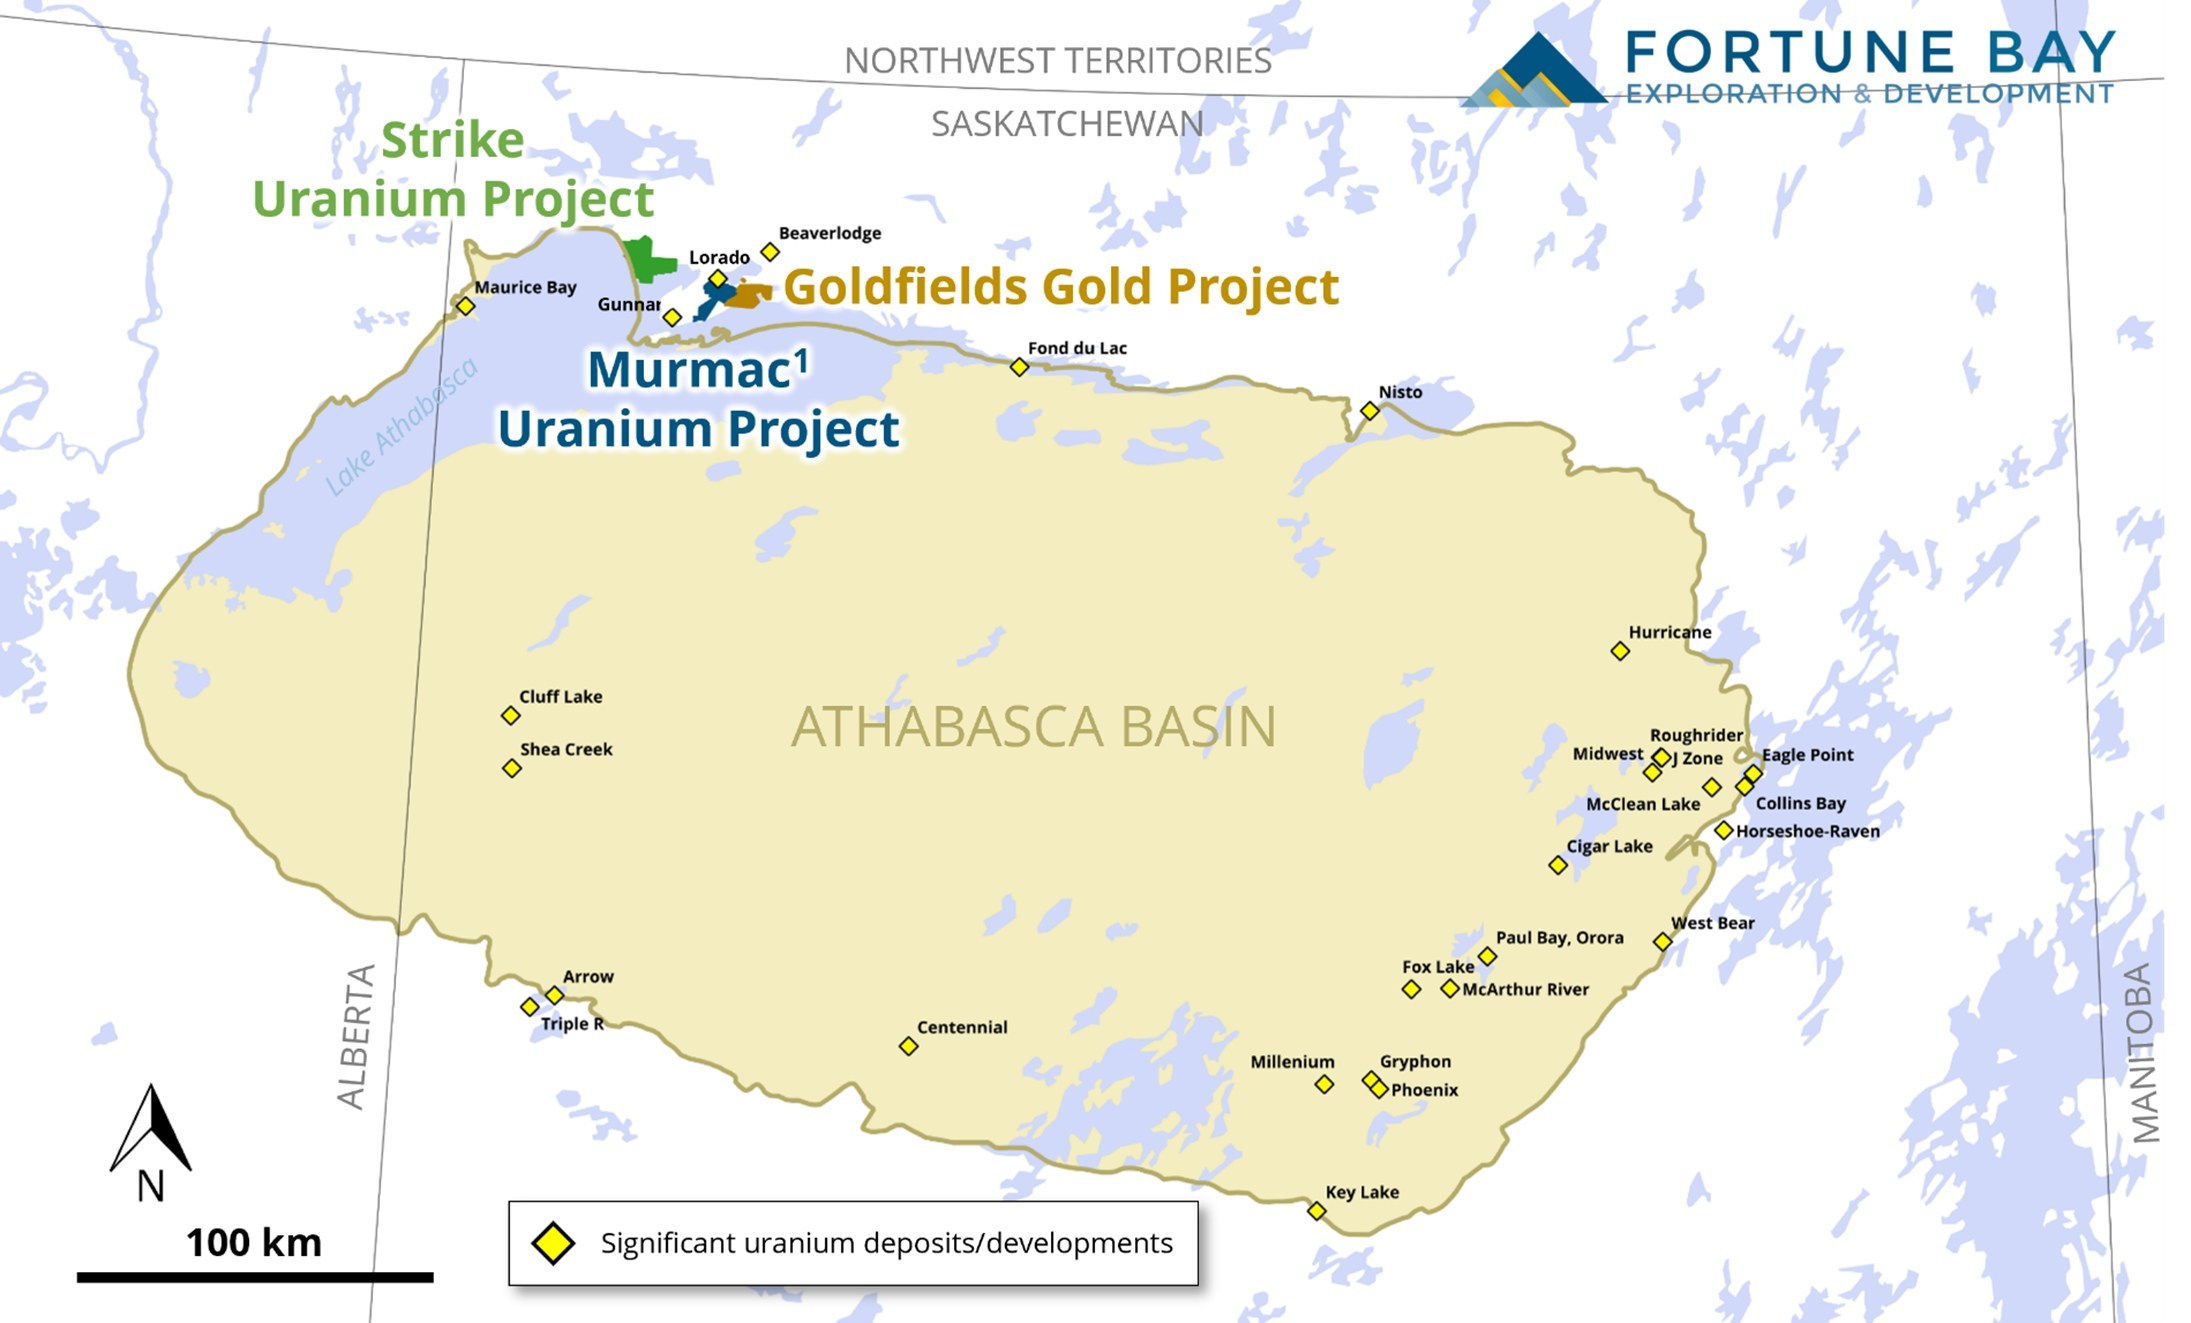 Fortune Bay Announces Initial Drill Target Areas And 2022 Drilling Plans For The Strike Uranium Project